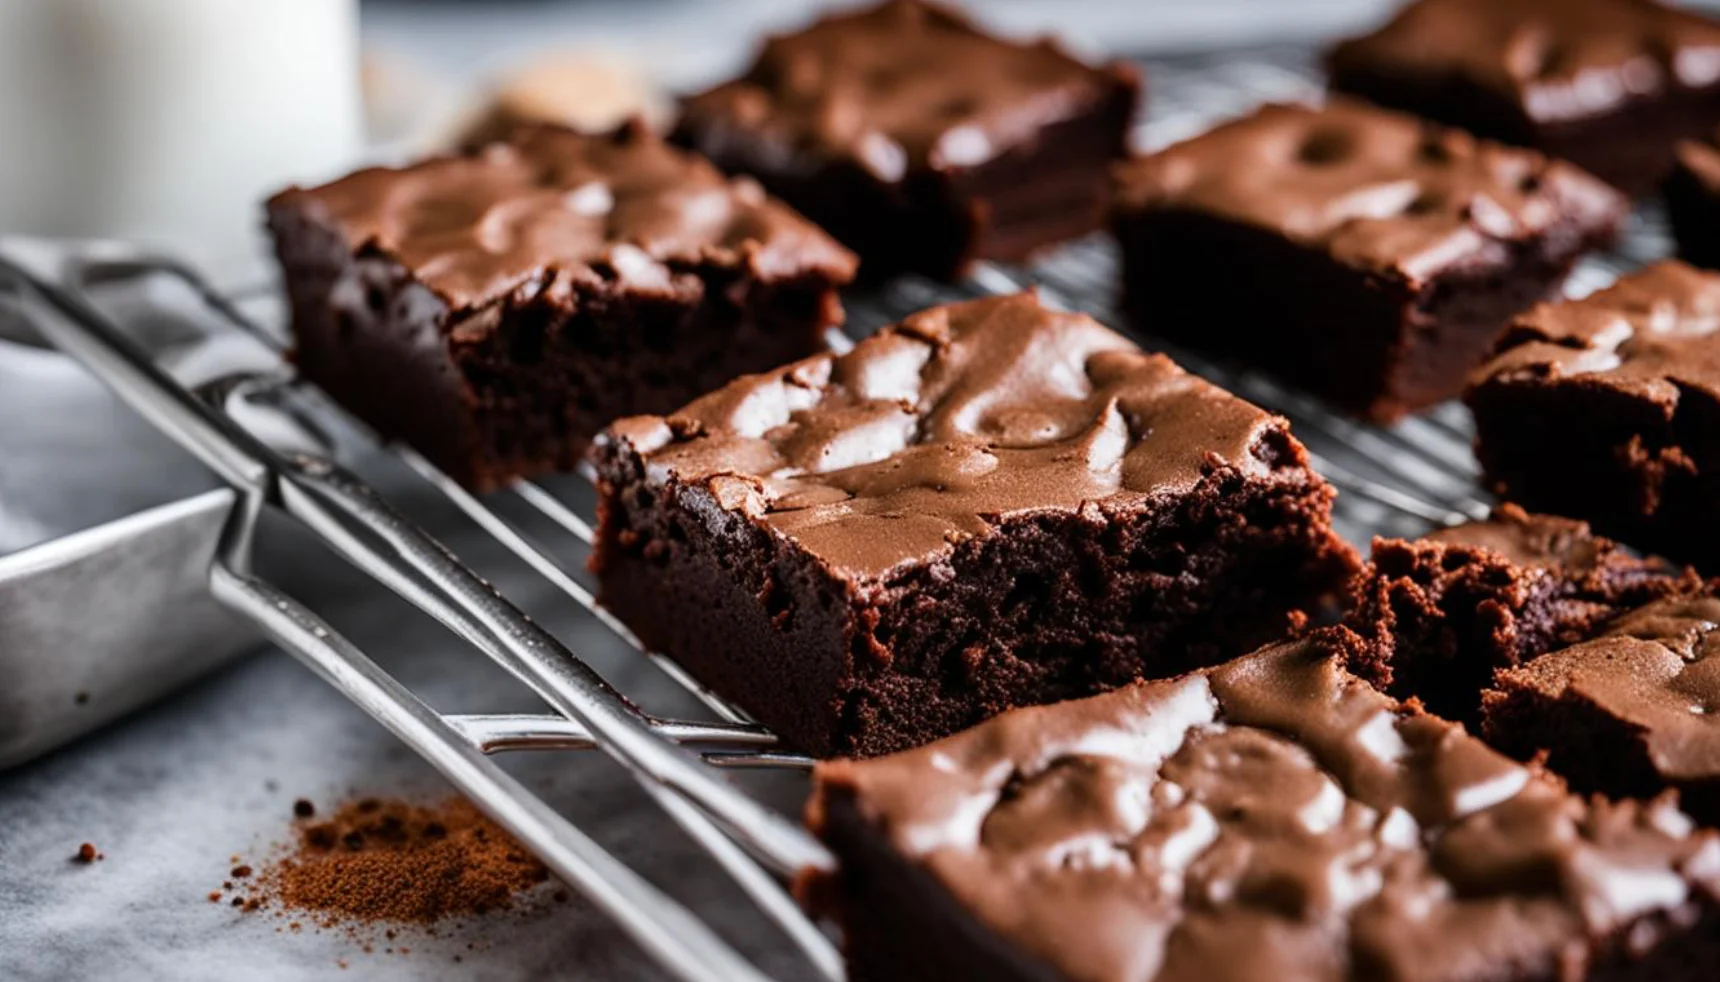 Perfecting your Treat: How Long Do You Let Brownies Cool?